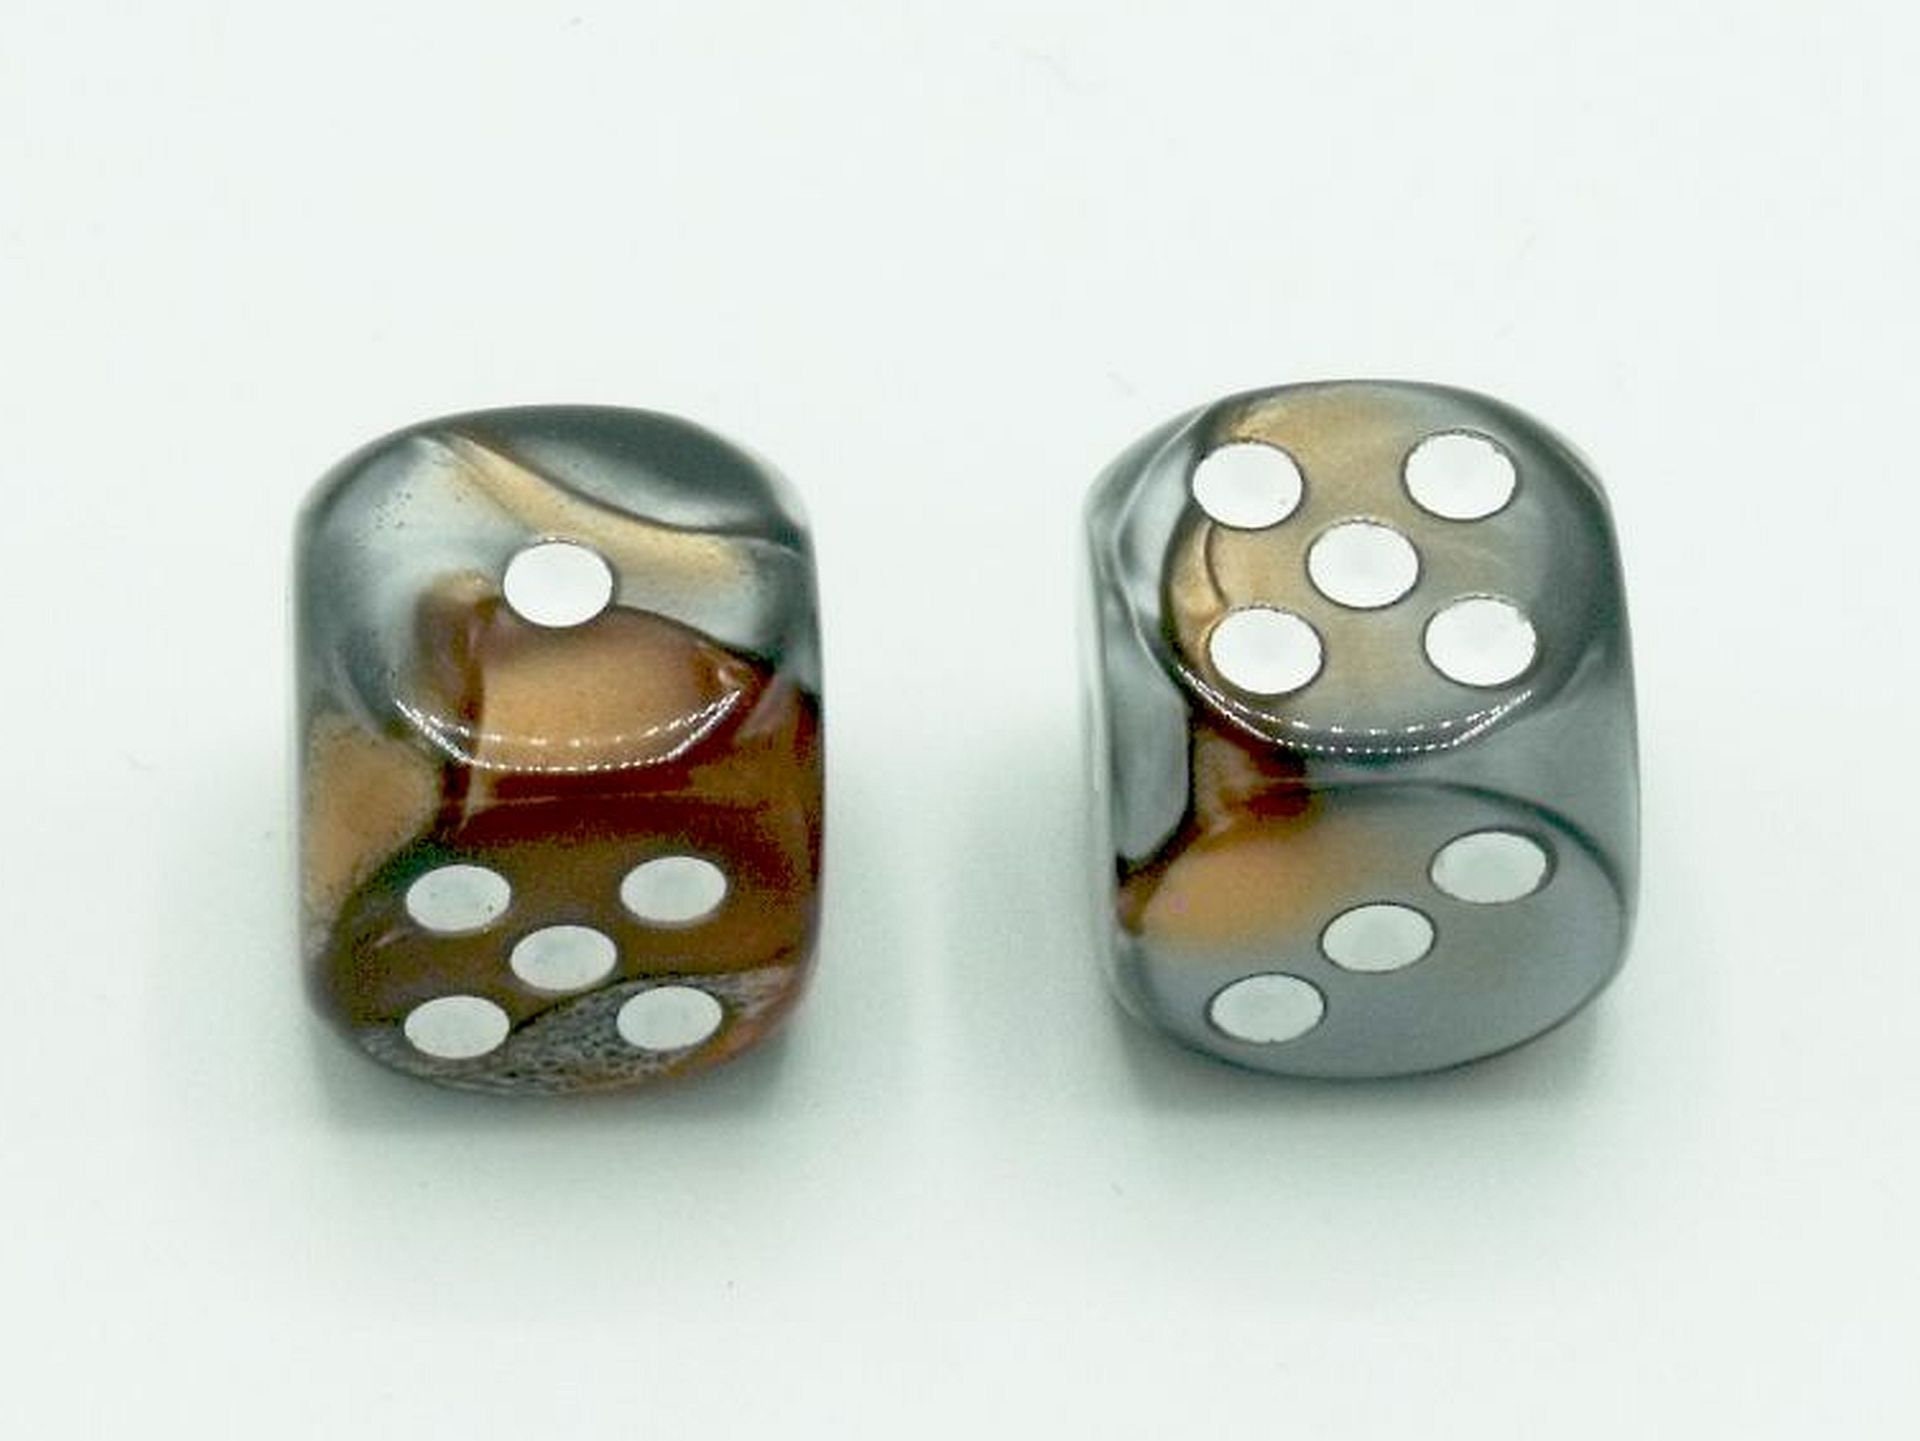 Gemini 18mm 4 Sided D4 Chessex Dice, 6 Pieces - Blue-Steel with White